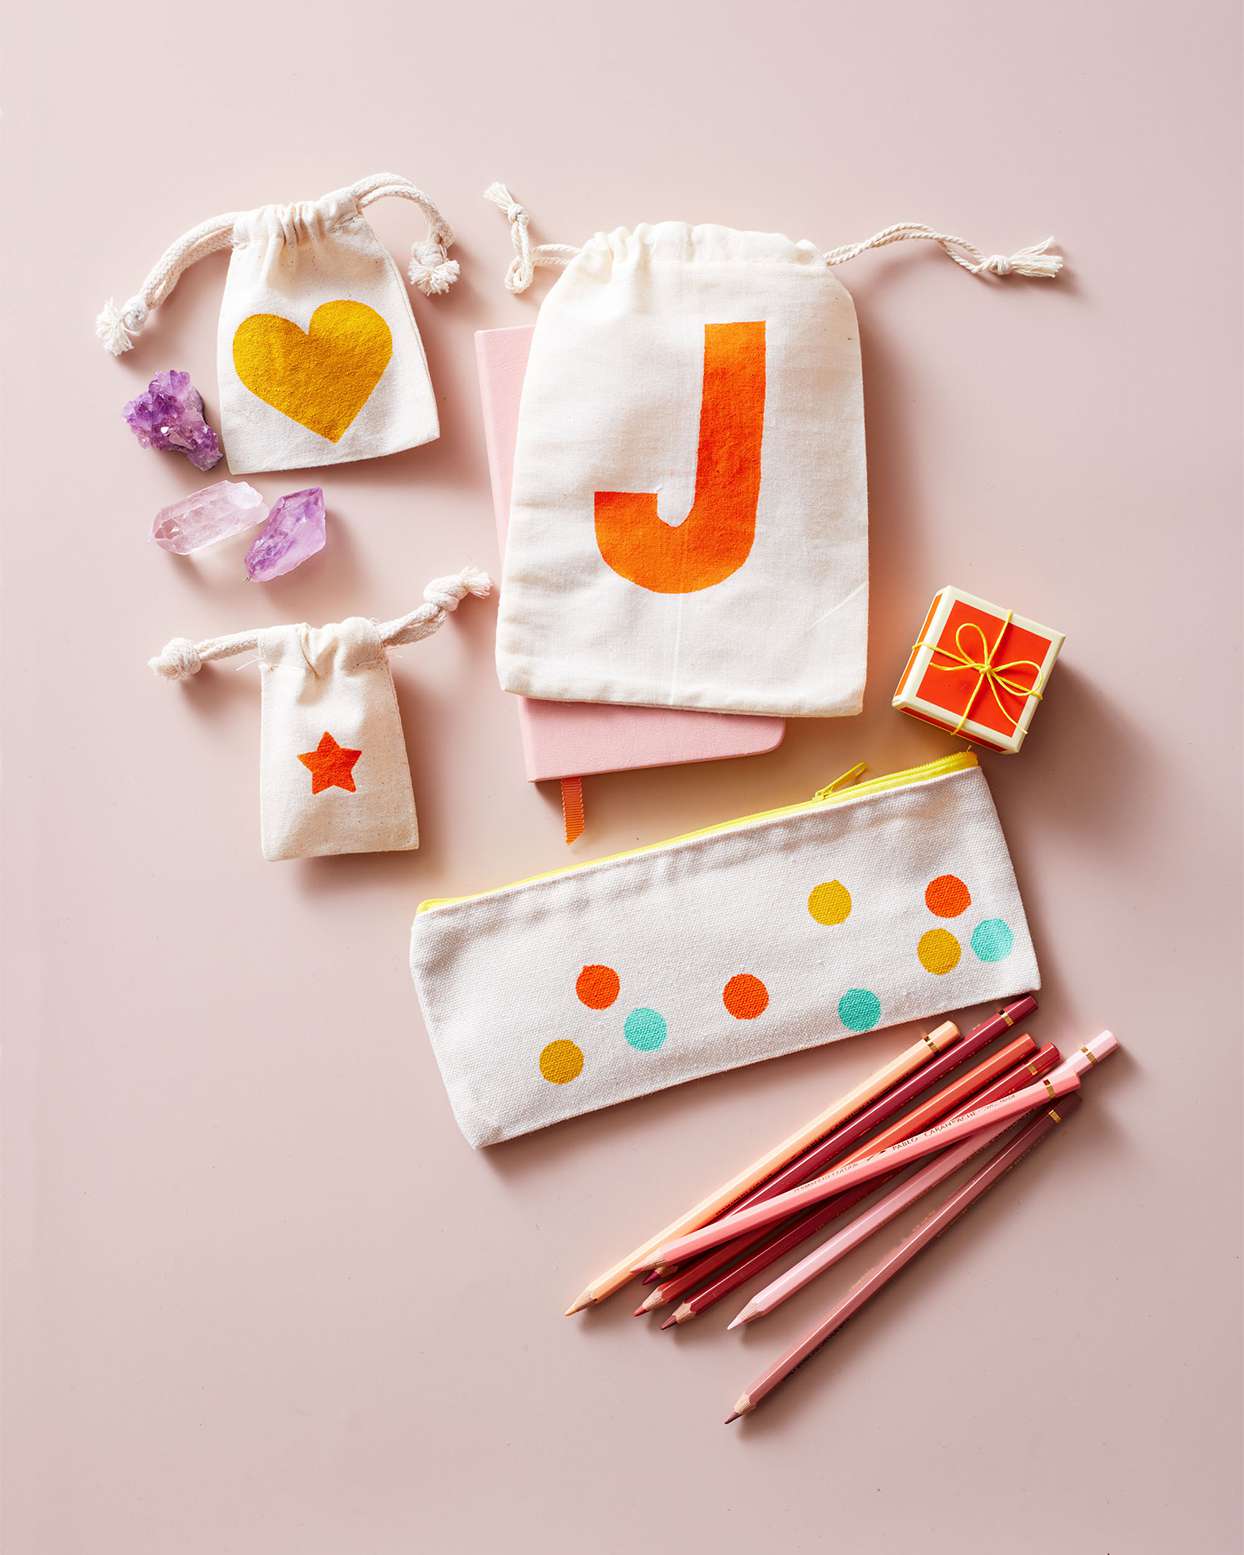 Basic Materials For Mother's Day Craft Gift Ideas